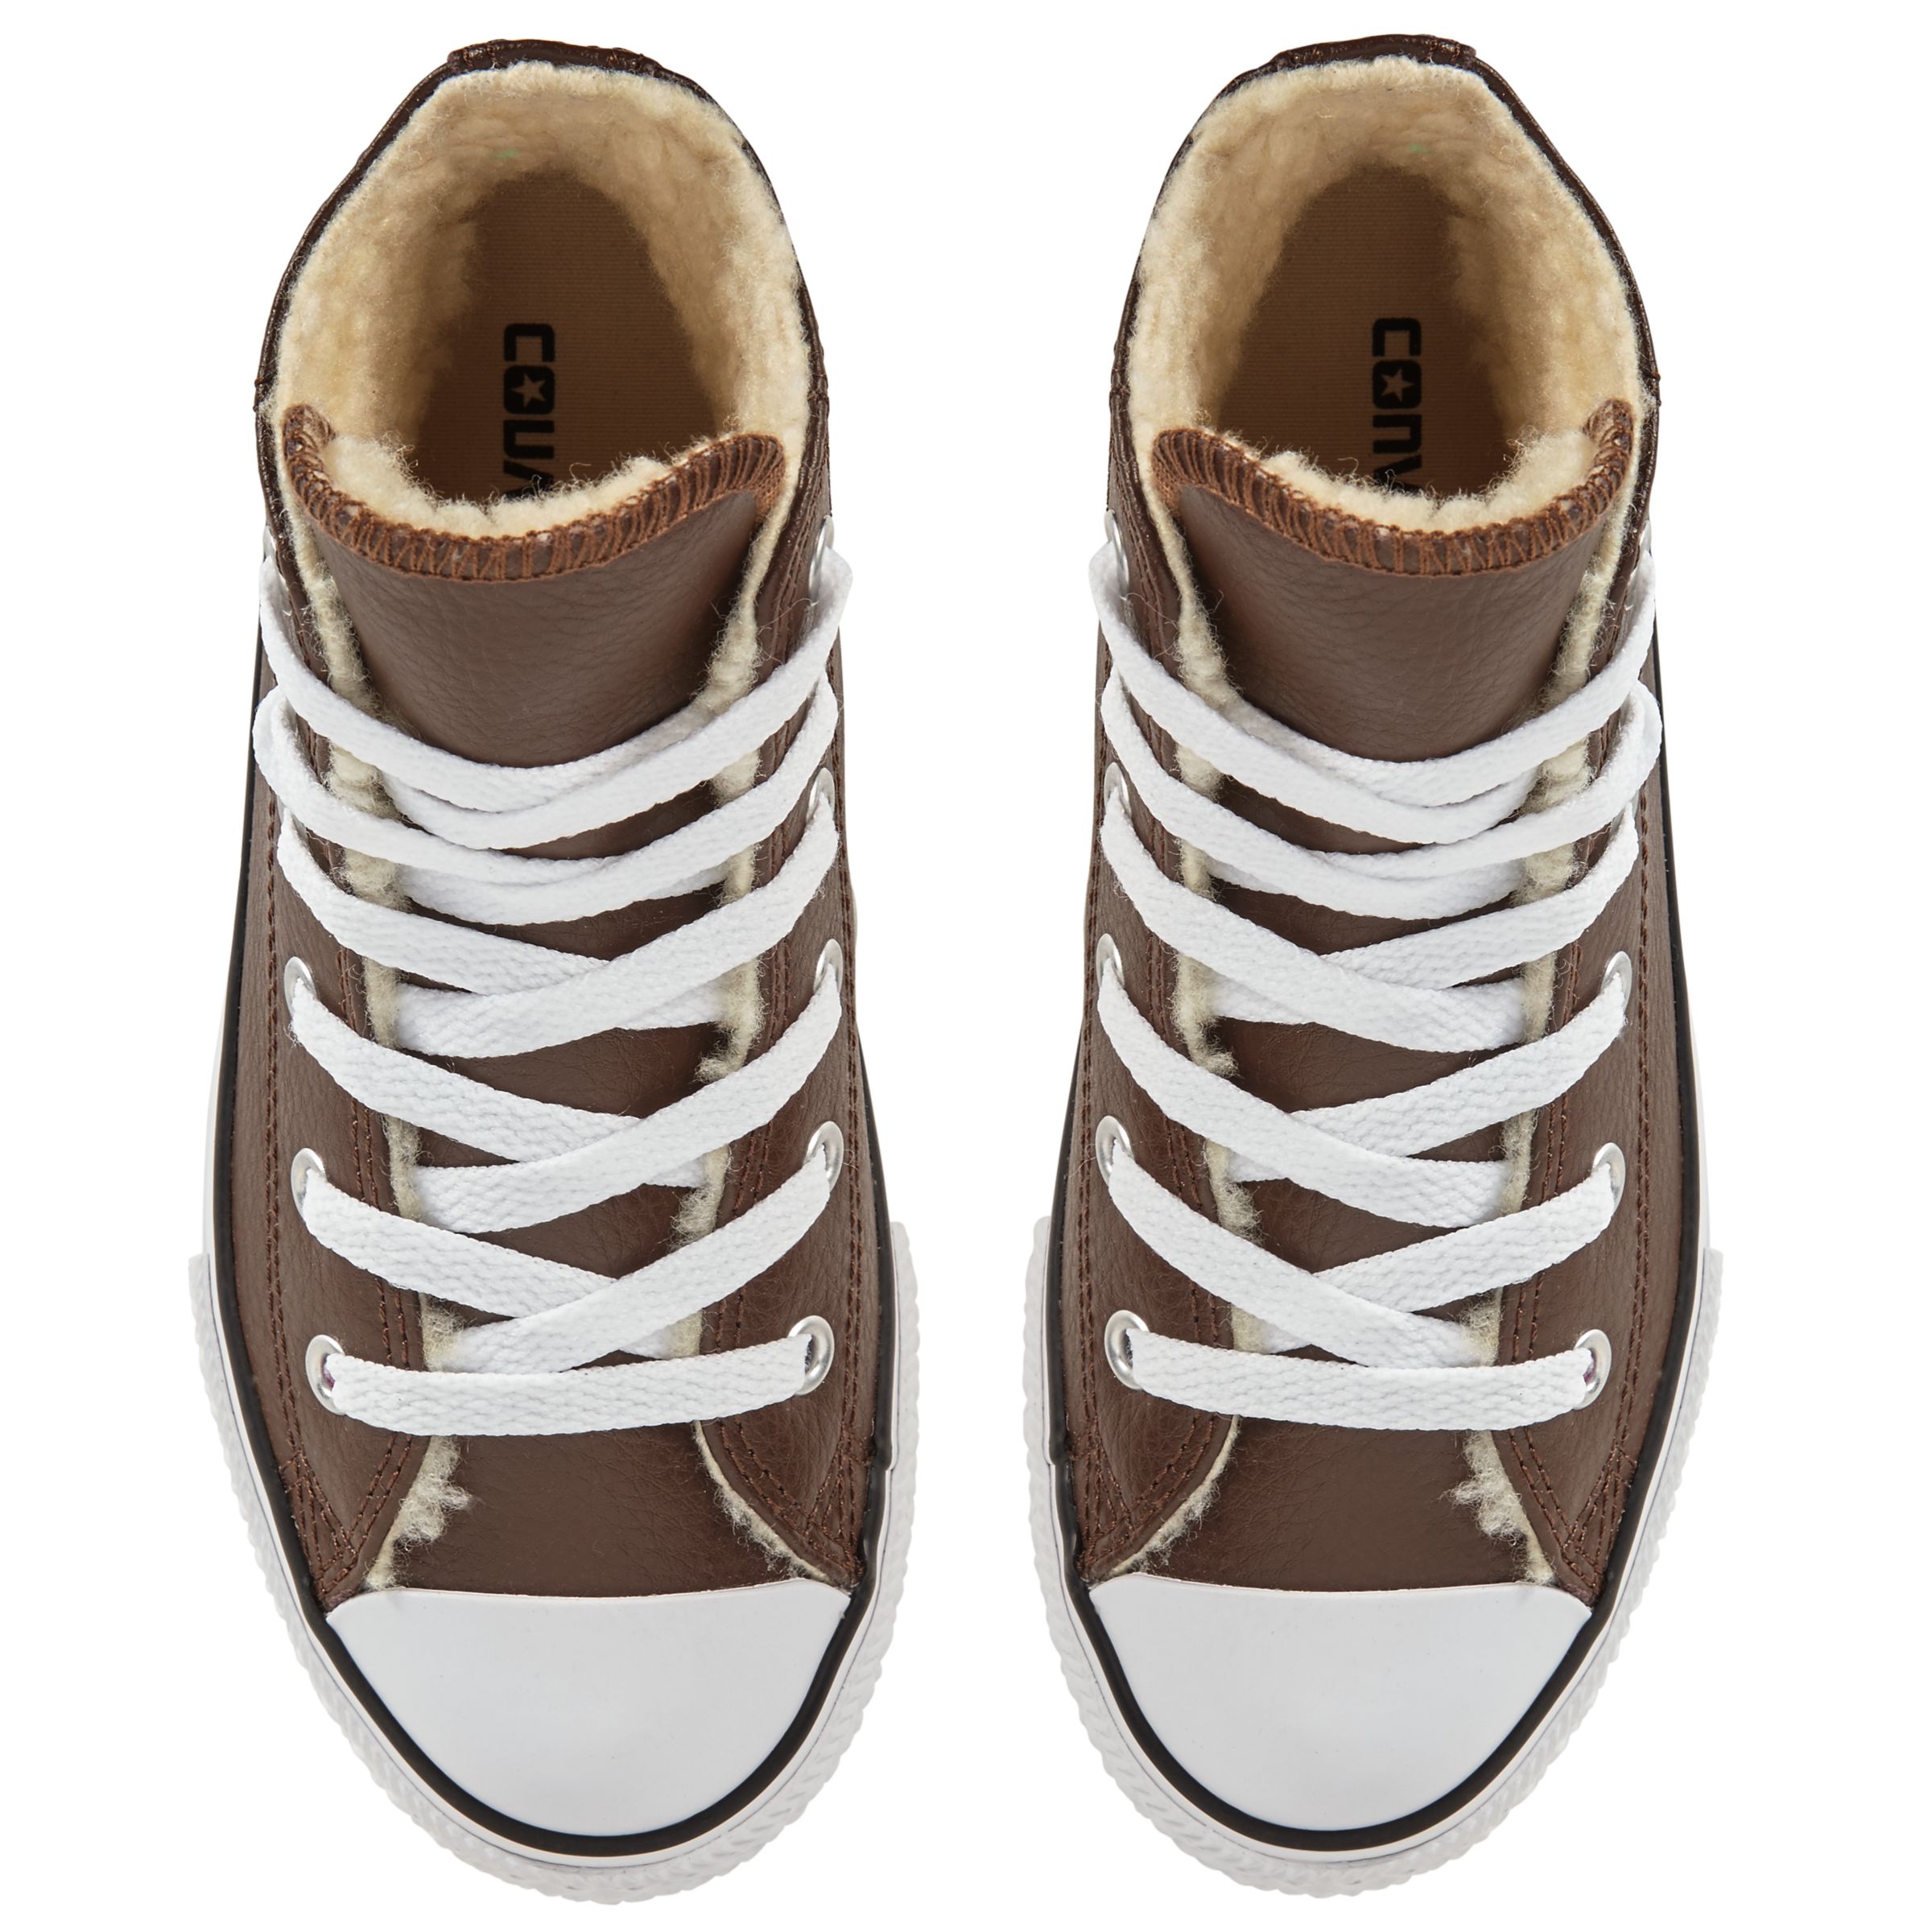 converse all star leather fur